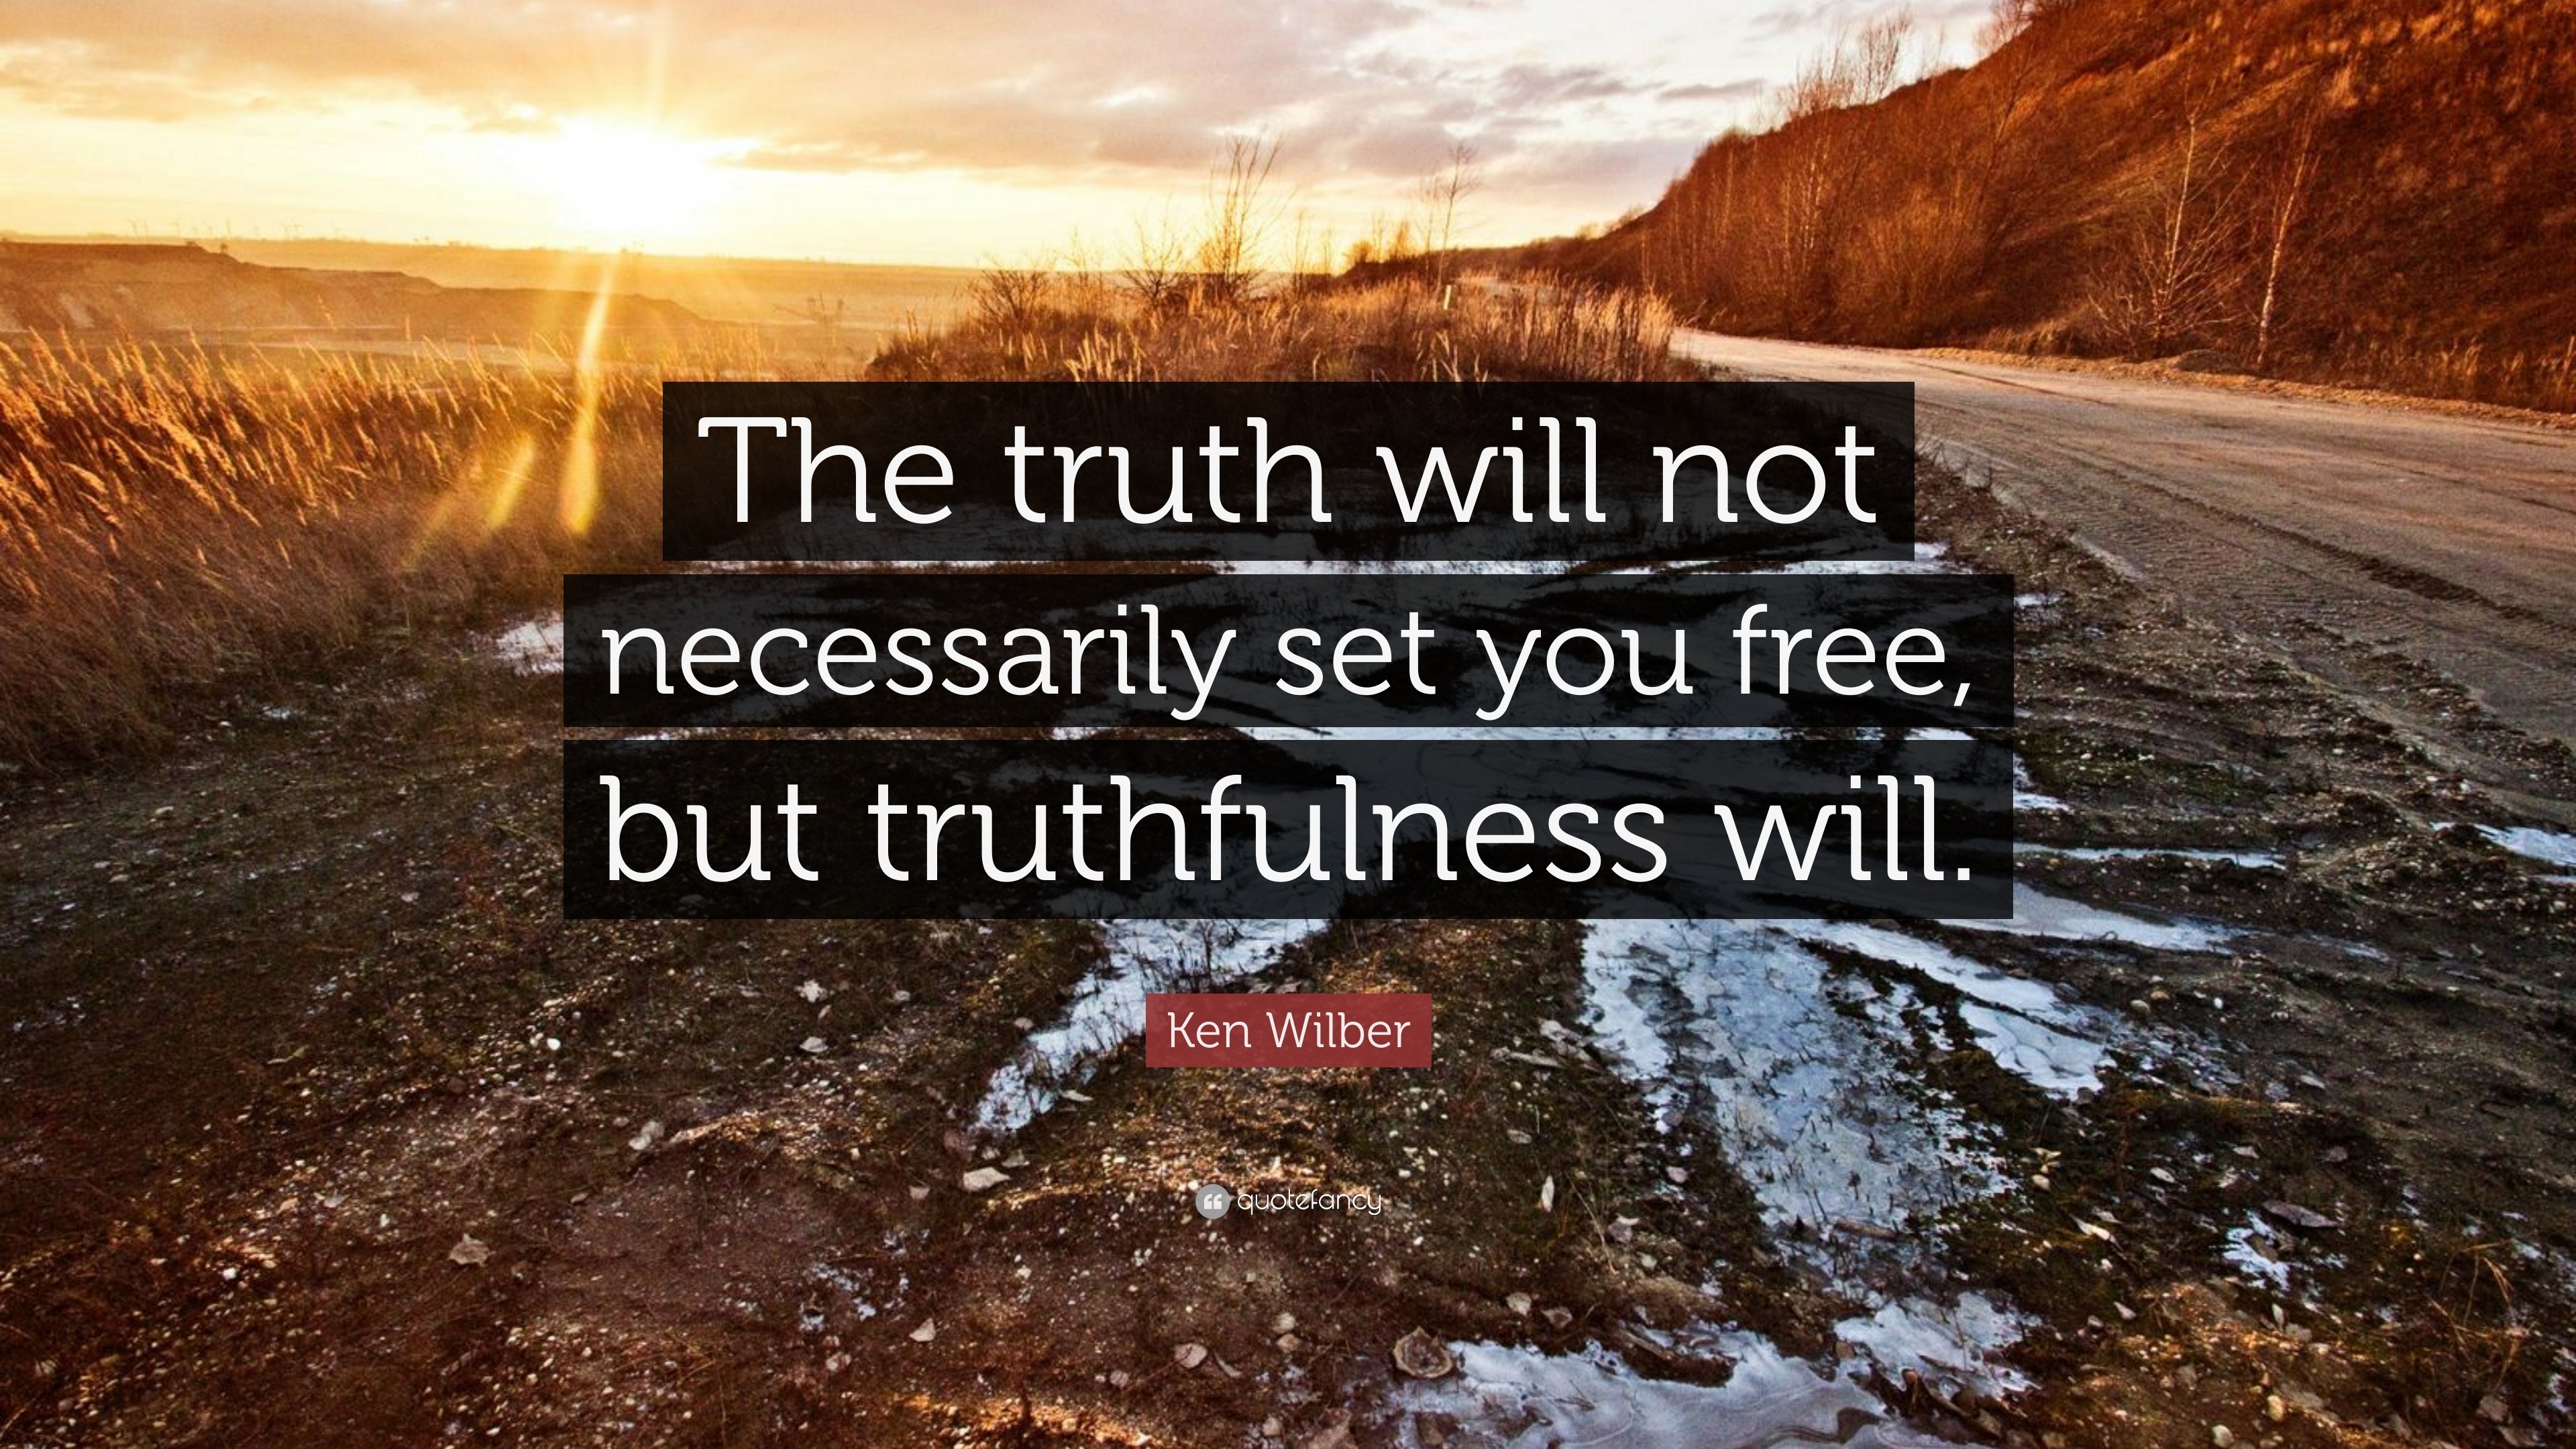 Ken Wilber Quote “The truth will not necessarily set you free but truthfulness